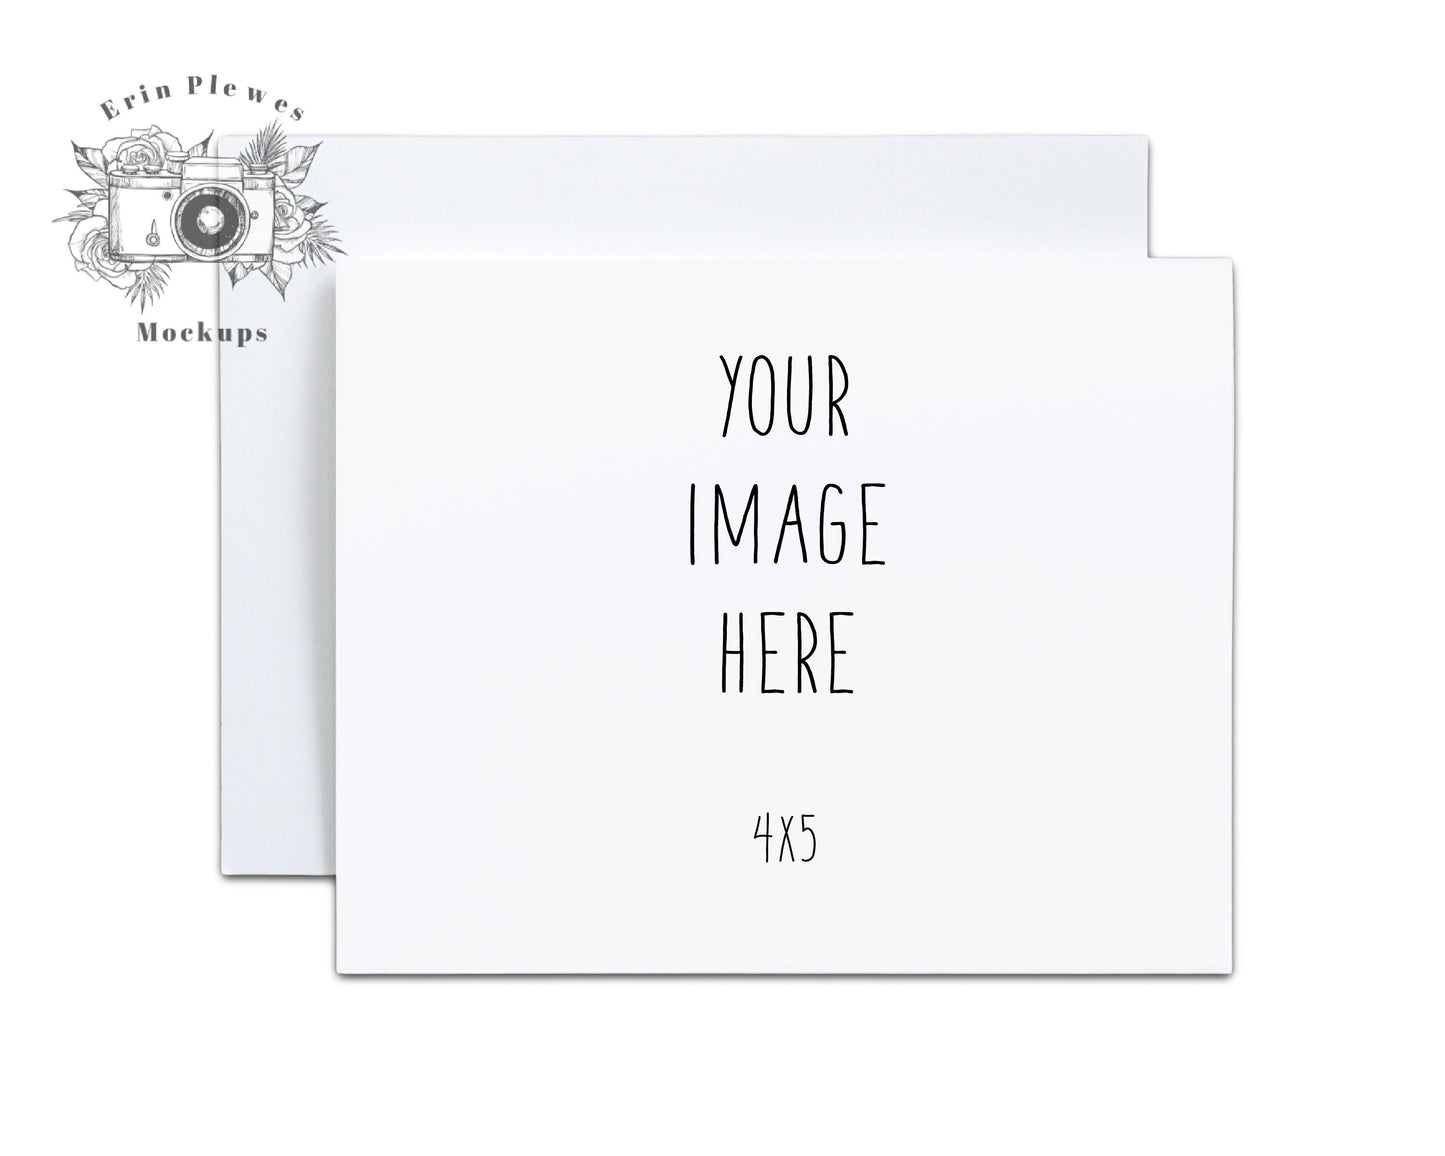 4x5 Card mockup on white background, Invitation mock-up with envelope, 5x4 Stationery Flat Lay, Jpeg Instant Digital Download Template